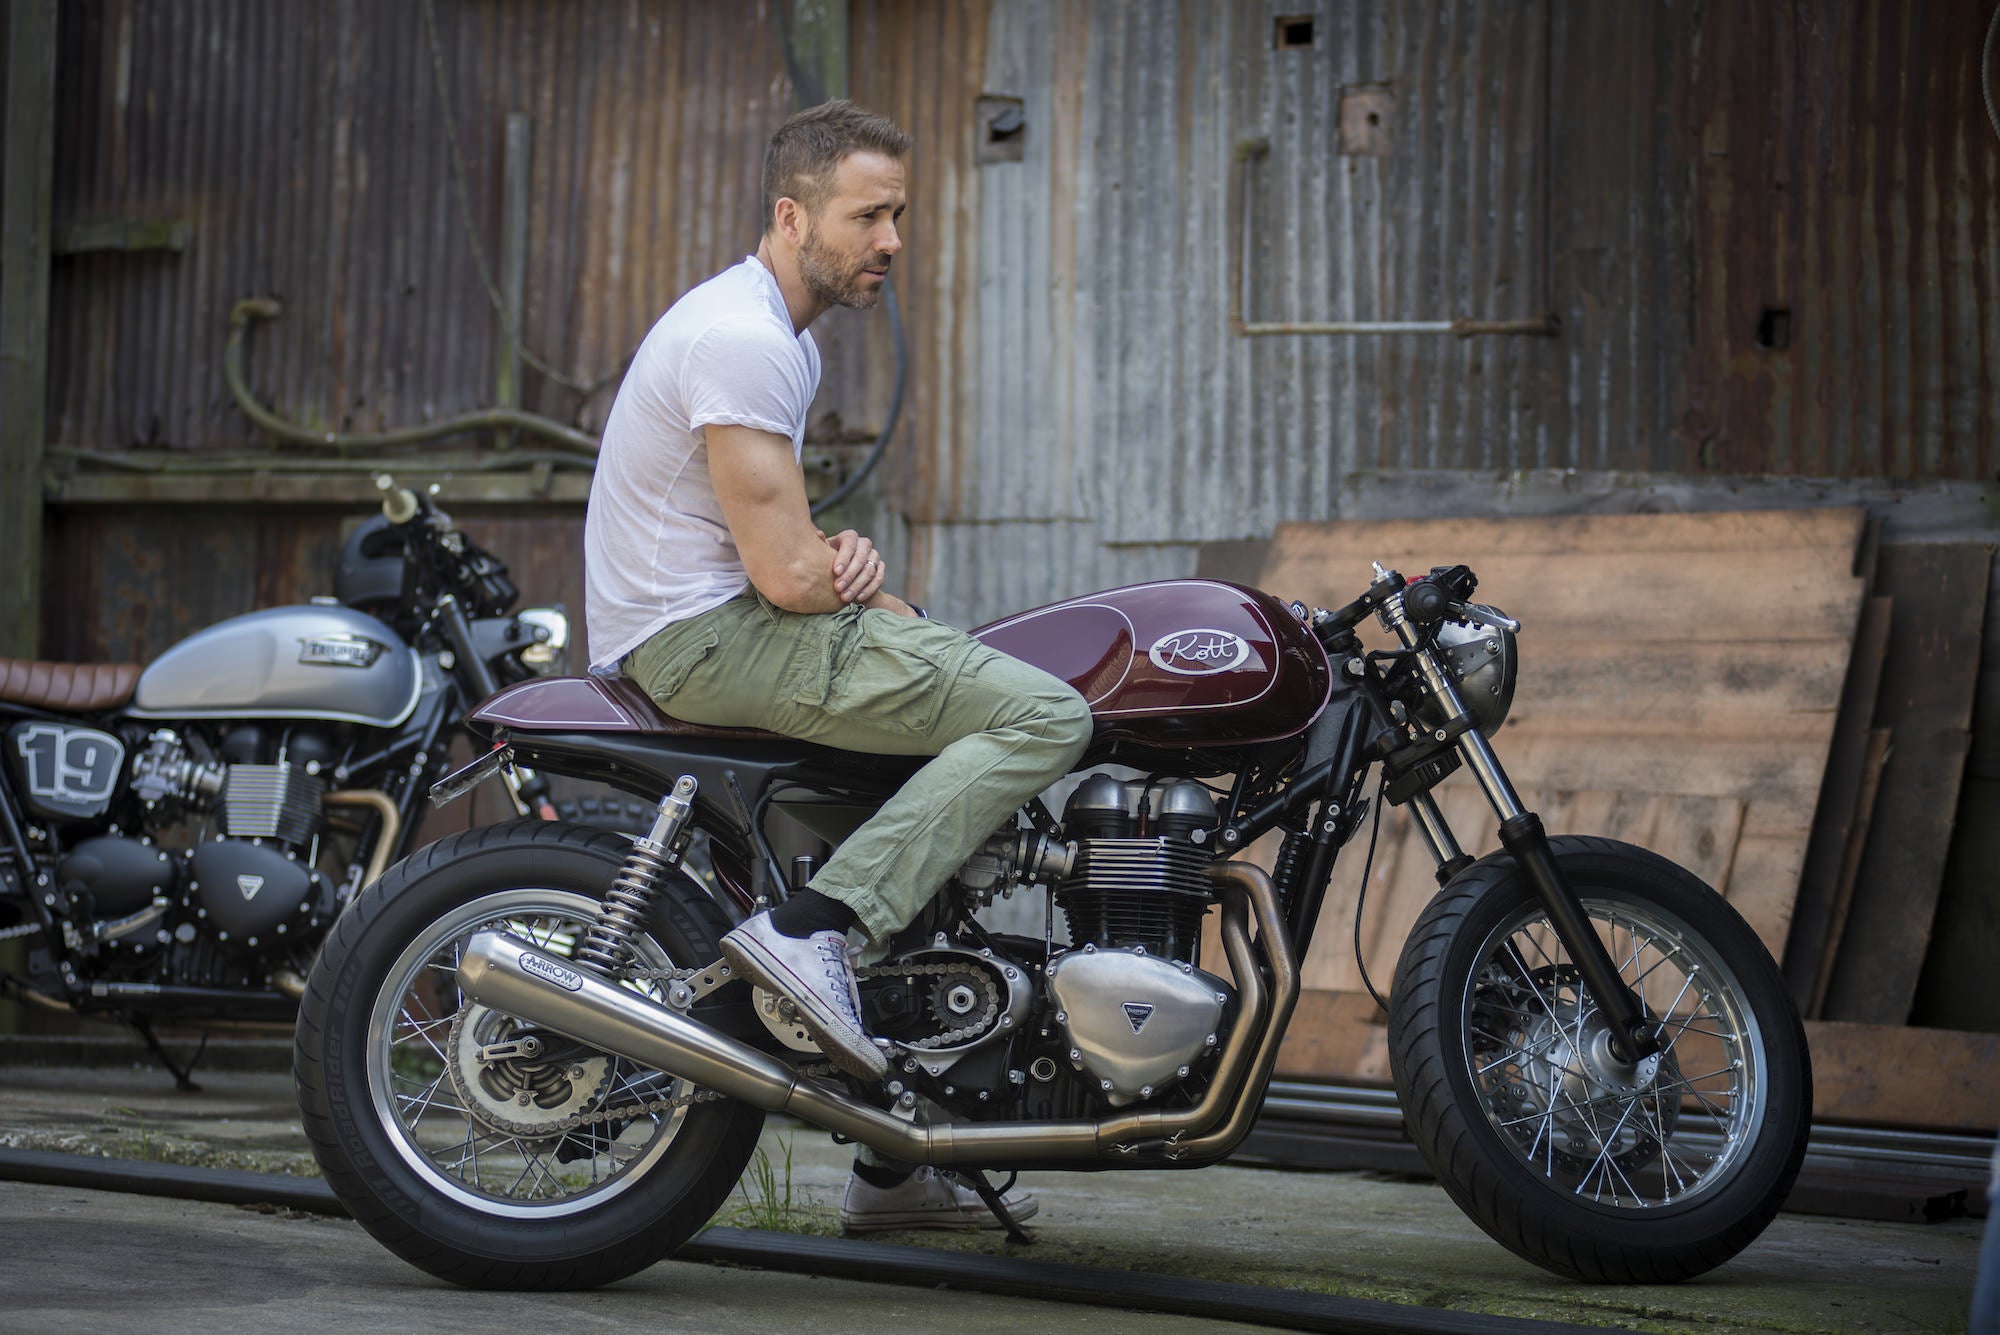 Ryan Reynolds and his Triumph Thruxton cafe racer. Famous motorcycle riders